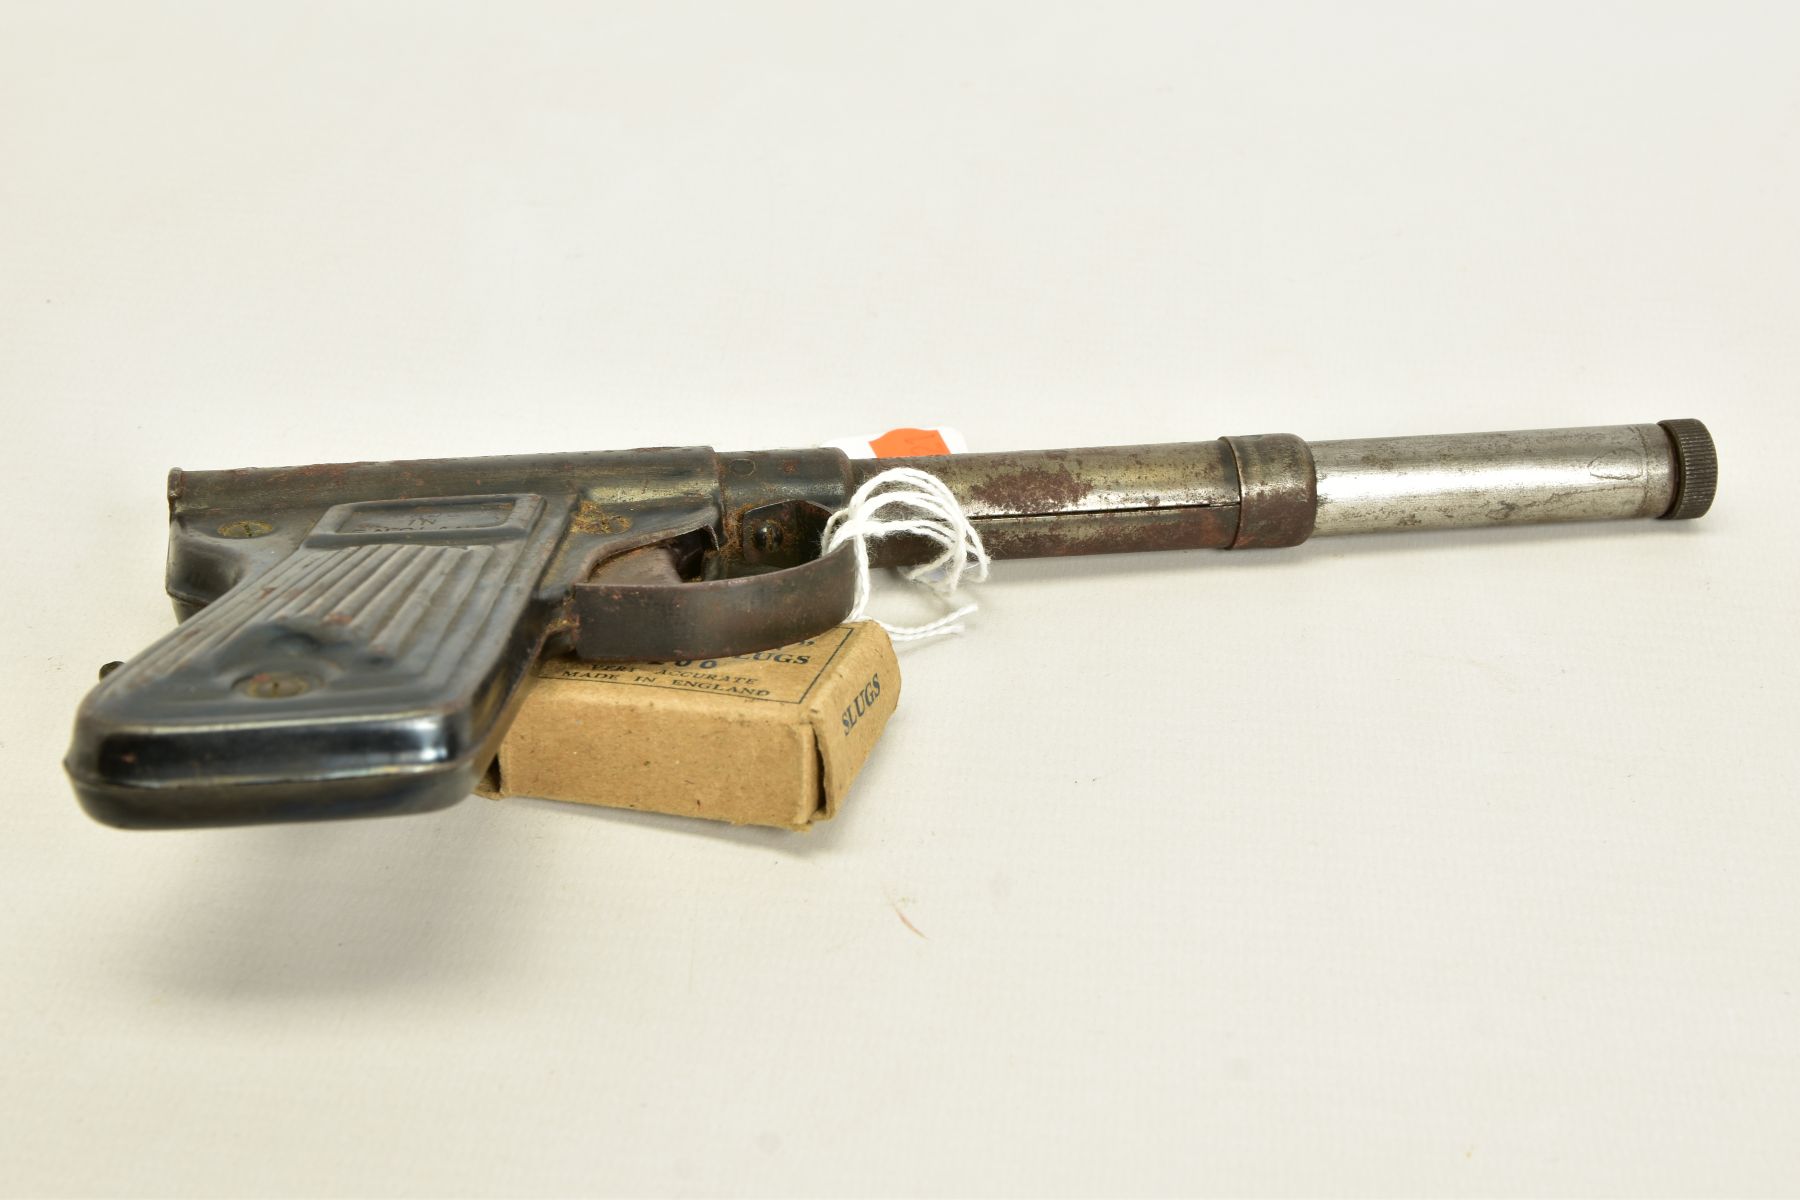 A .177'' BRITON PRESSED STEEL 'GAT' TYPE AIR PISTOL, complete with pellet insertion rod and a packet - Image 6 of 6